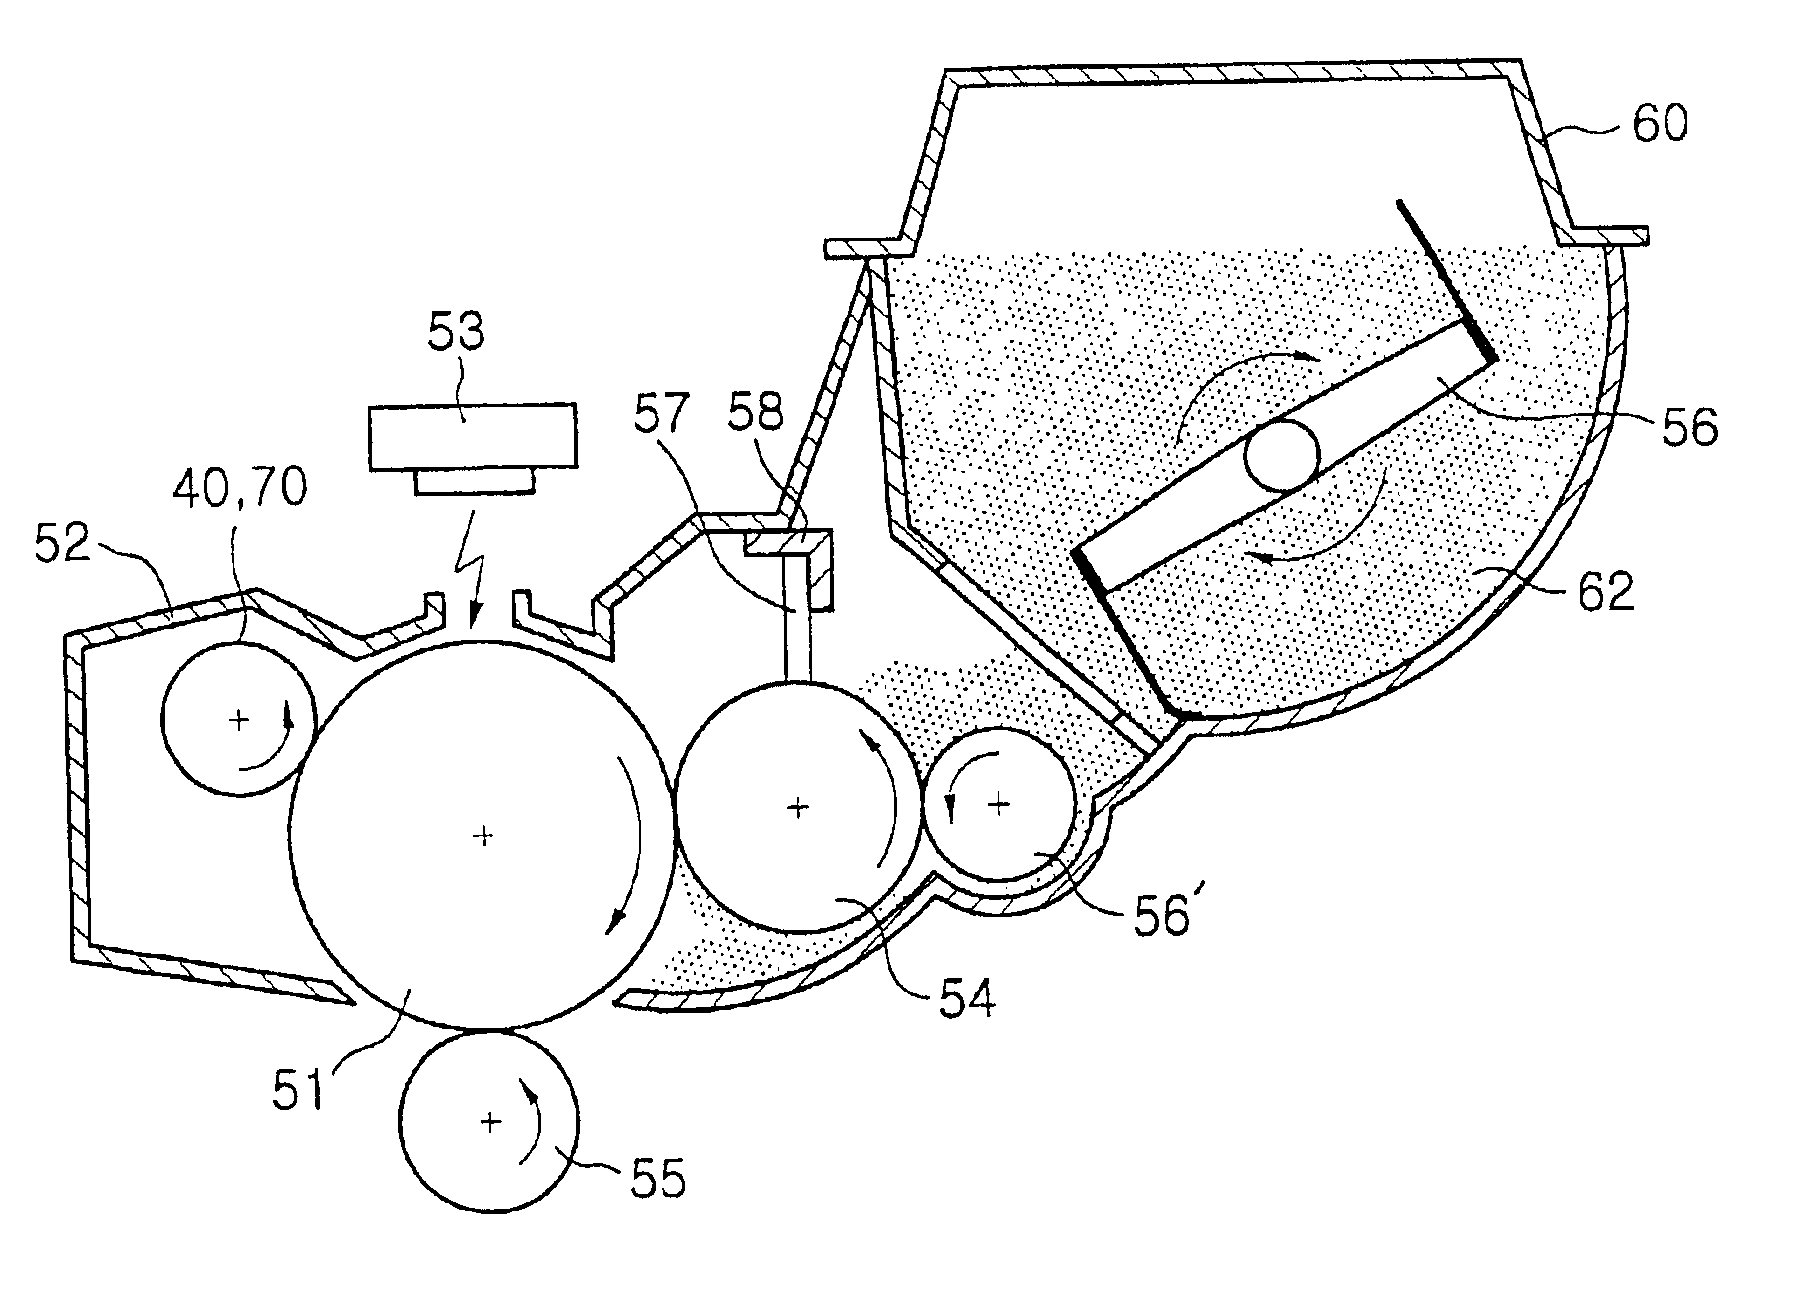 Charge roller of developing device for image forming apparatus